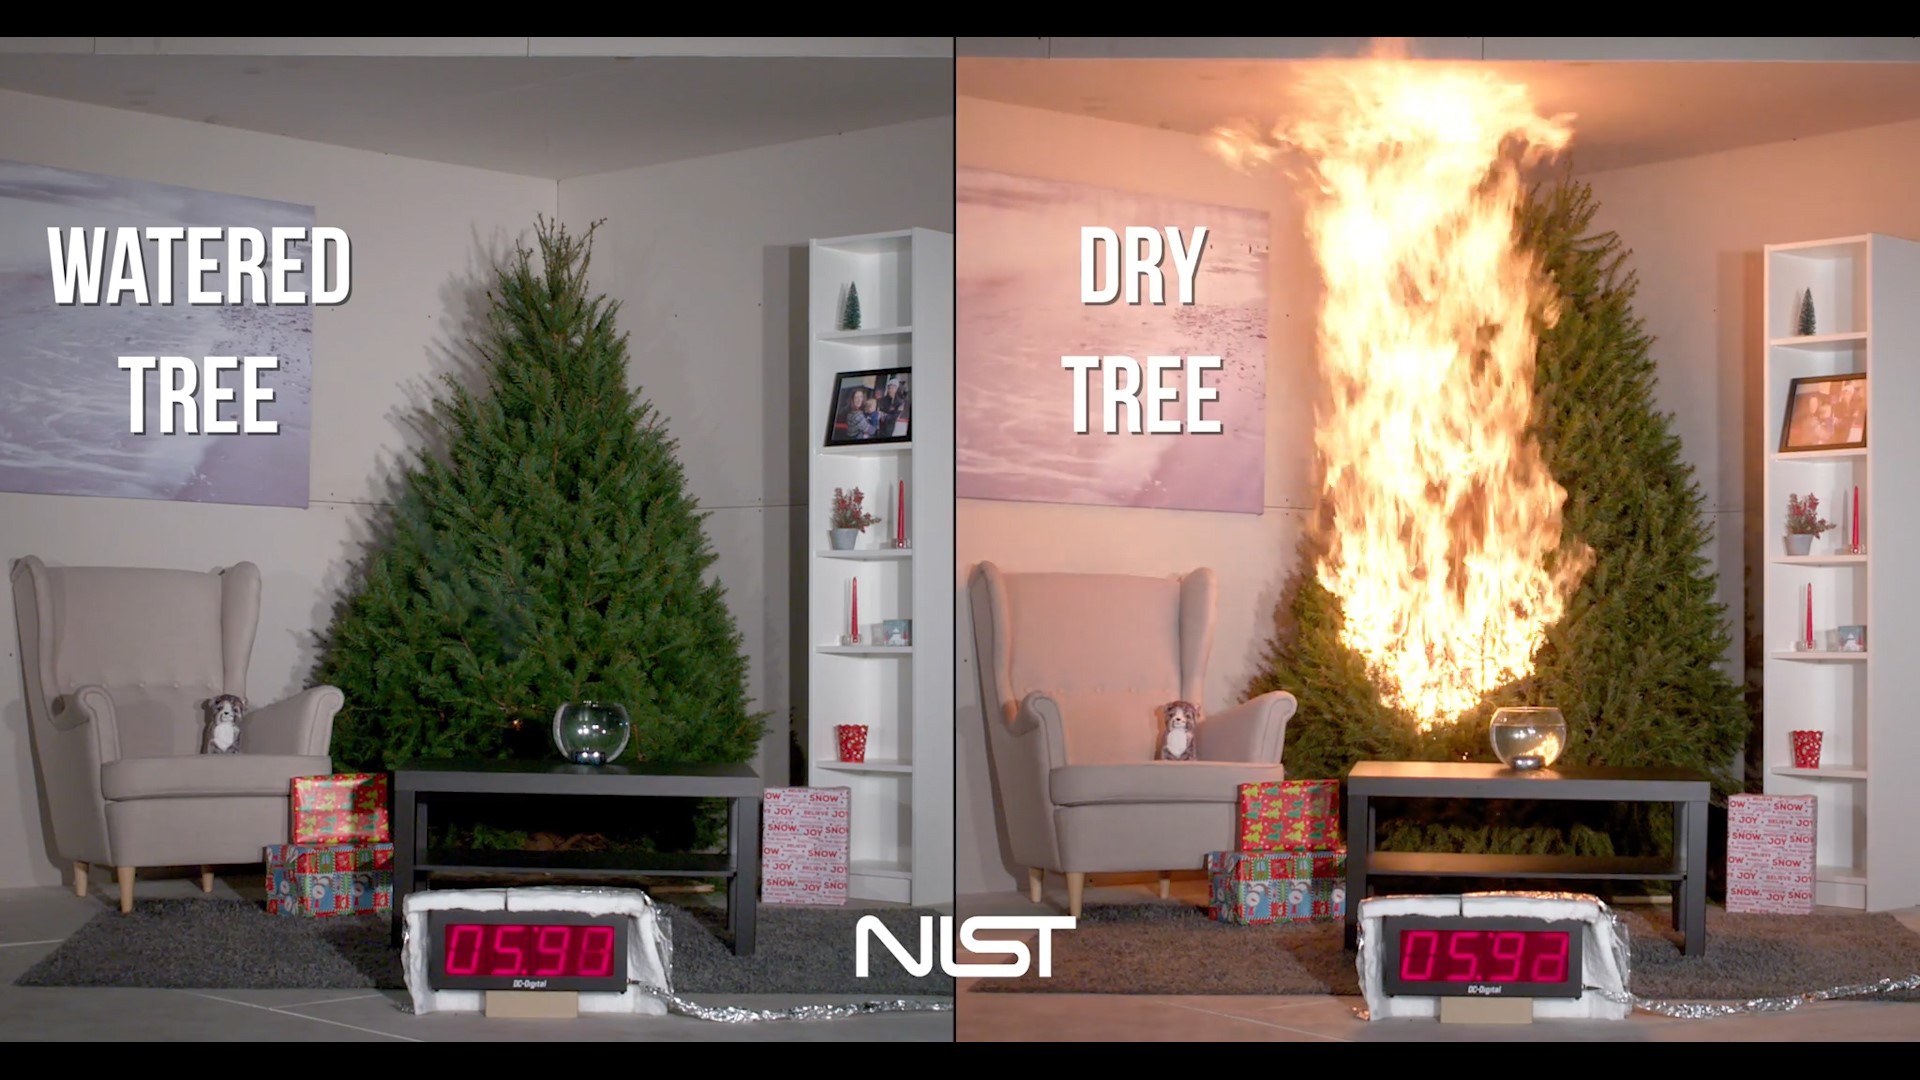 The U.S. Department of Commerce's National Institute of Standards and Technology did an experiment lighting an unwatered tree on fire and a watered tree on fire. The dry tree is up in flames in under five seconds.